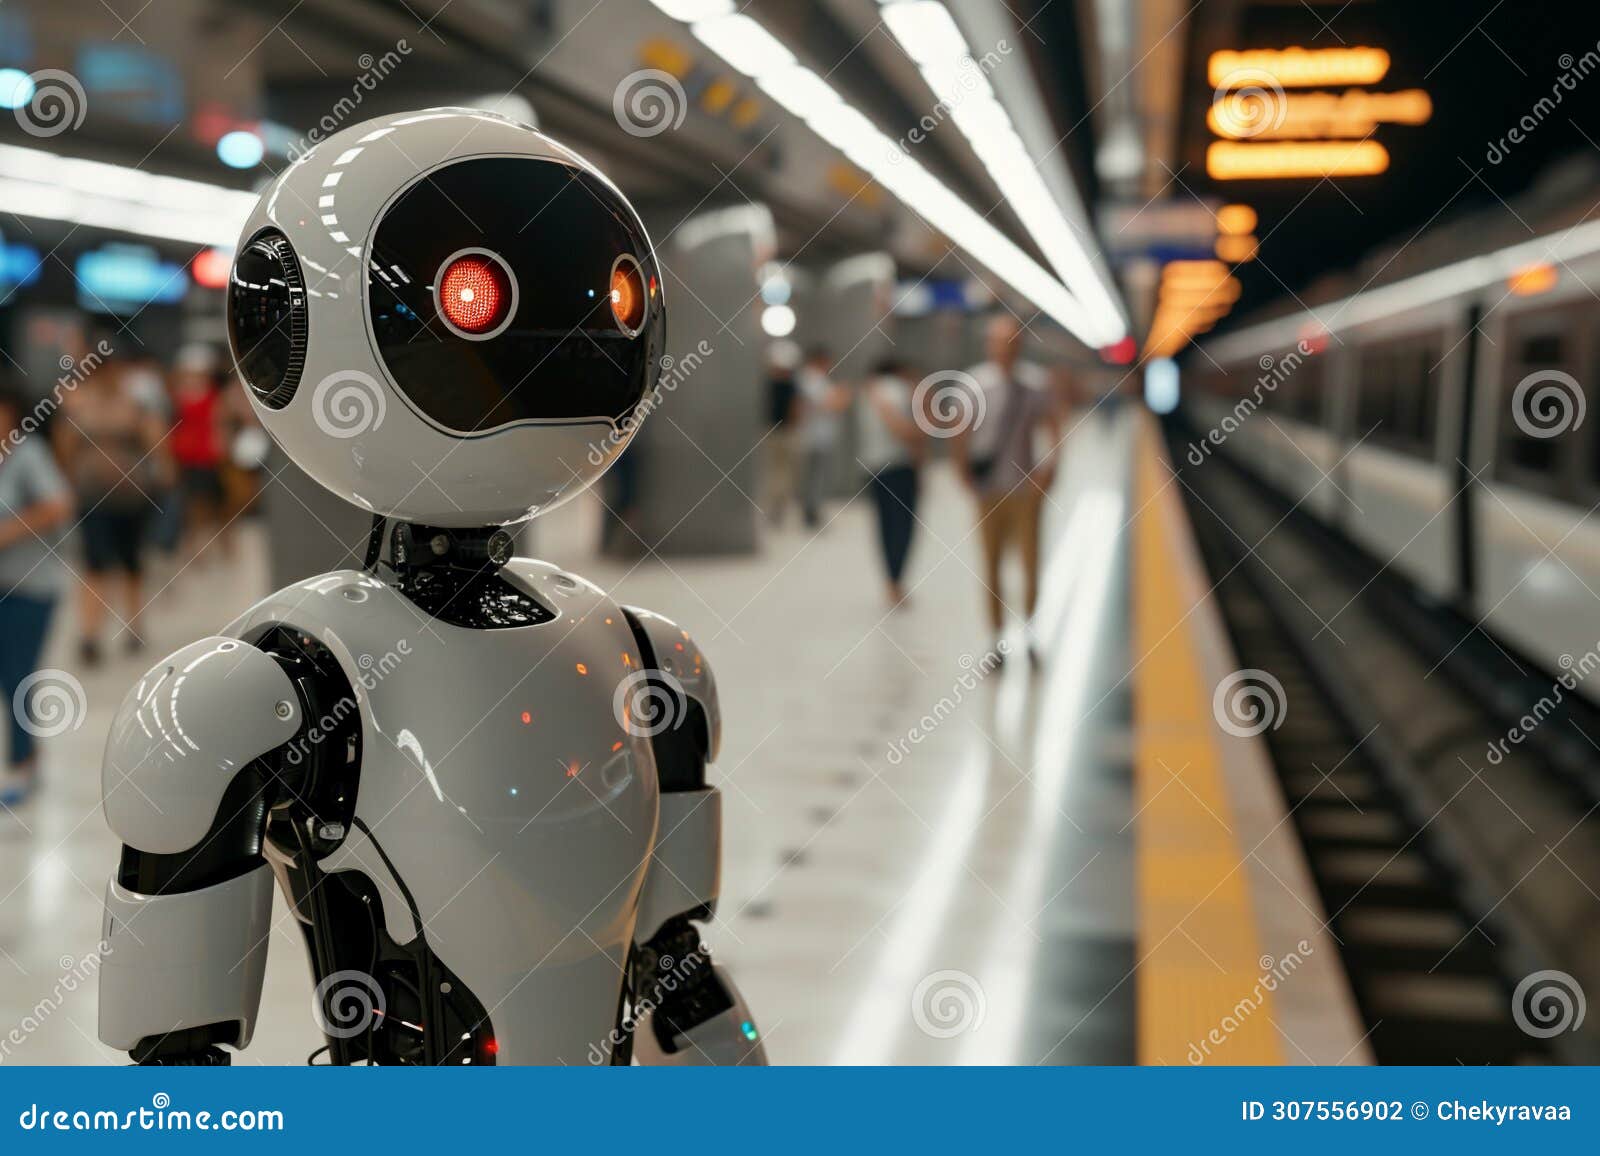 the robot standing in the subway on blurred background. artificial intelect in future life.